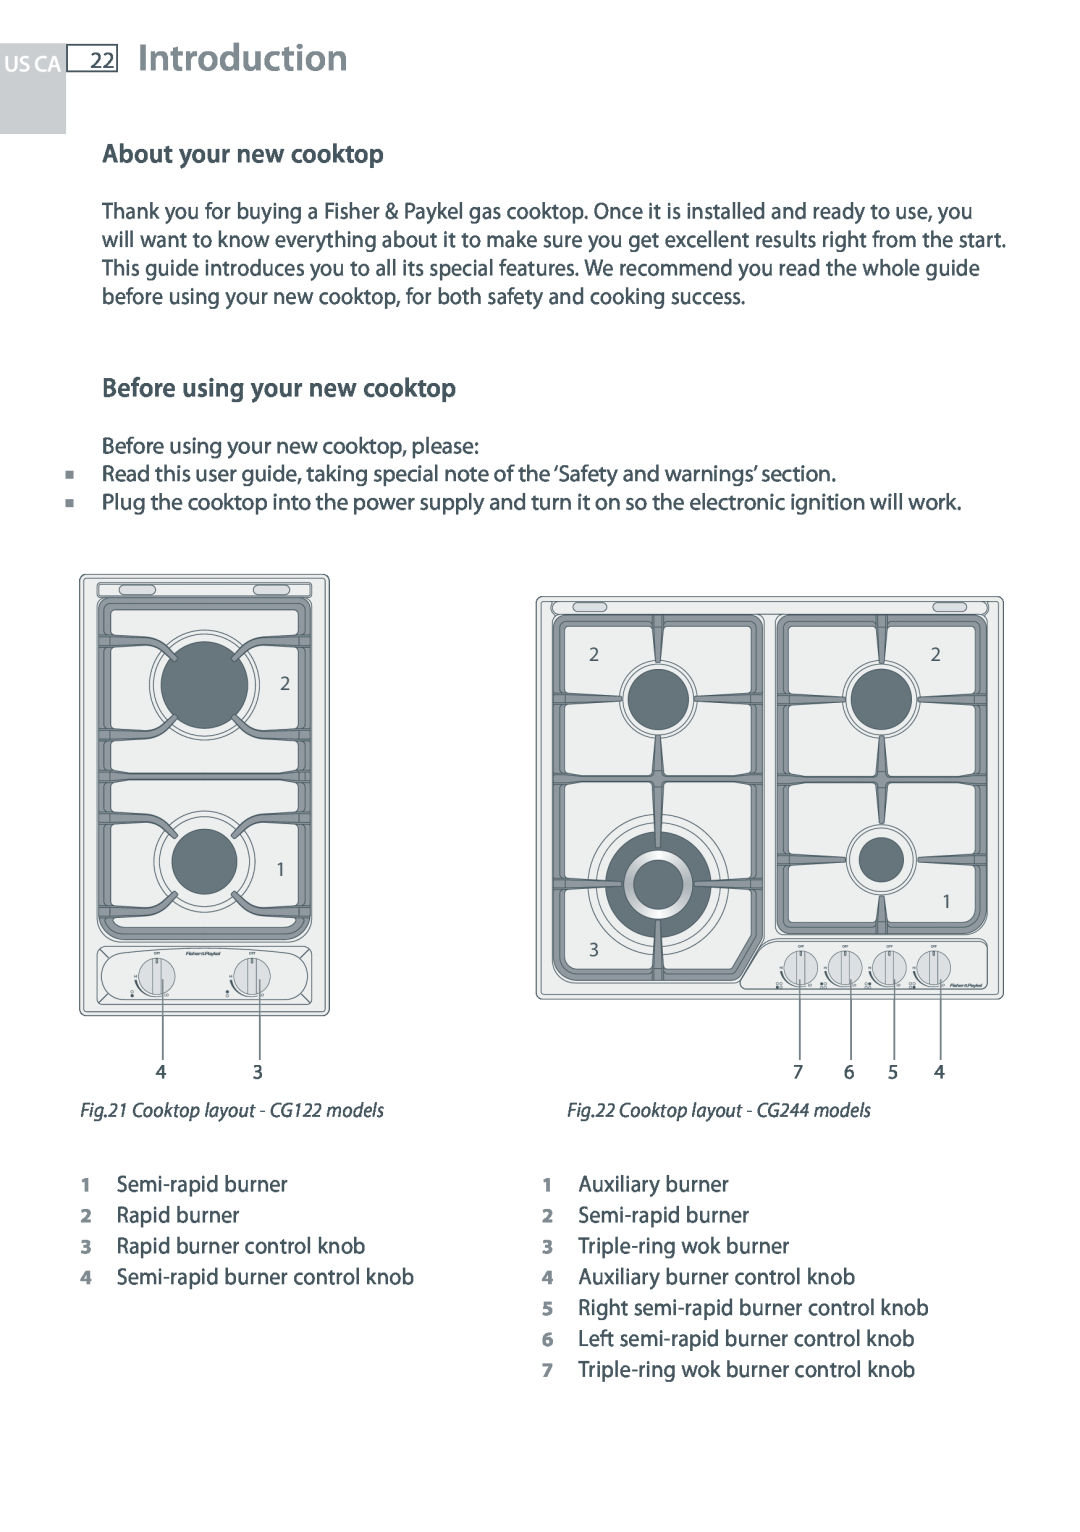 Fisher & Paykel CG244, CG122 Introduction, About your new cooktop, Before using your new cooktop, Us Ca 